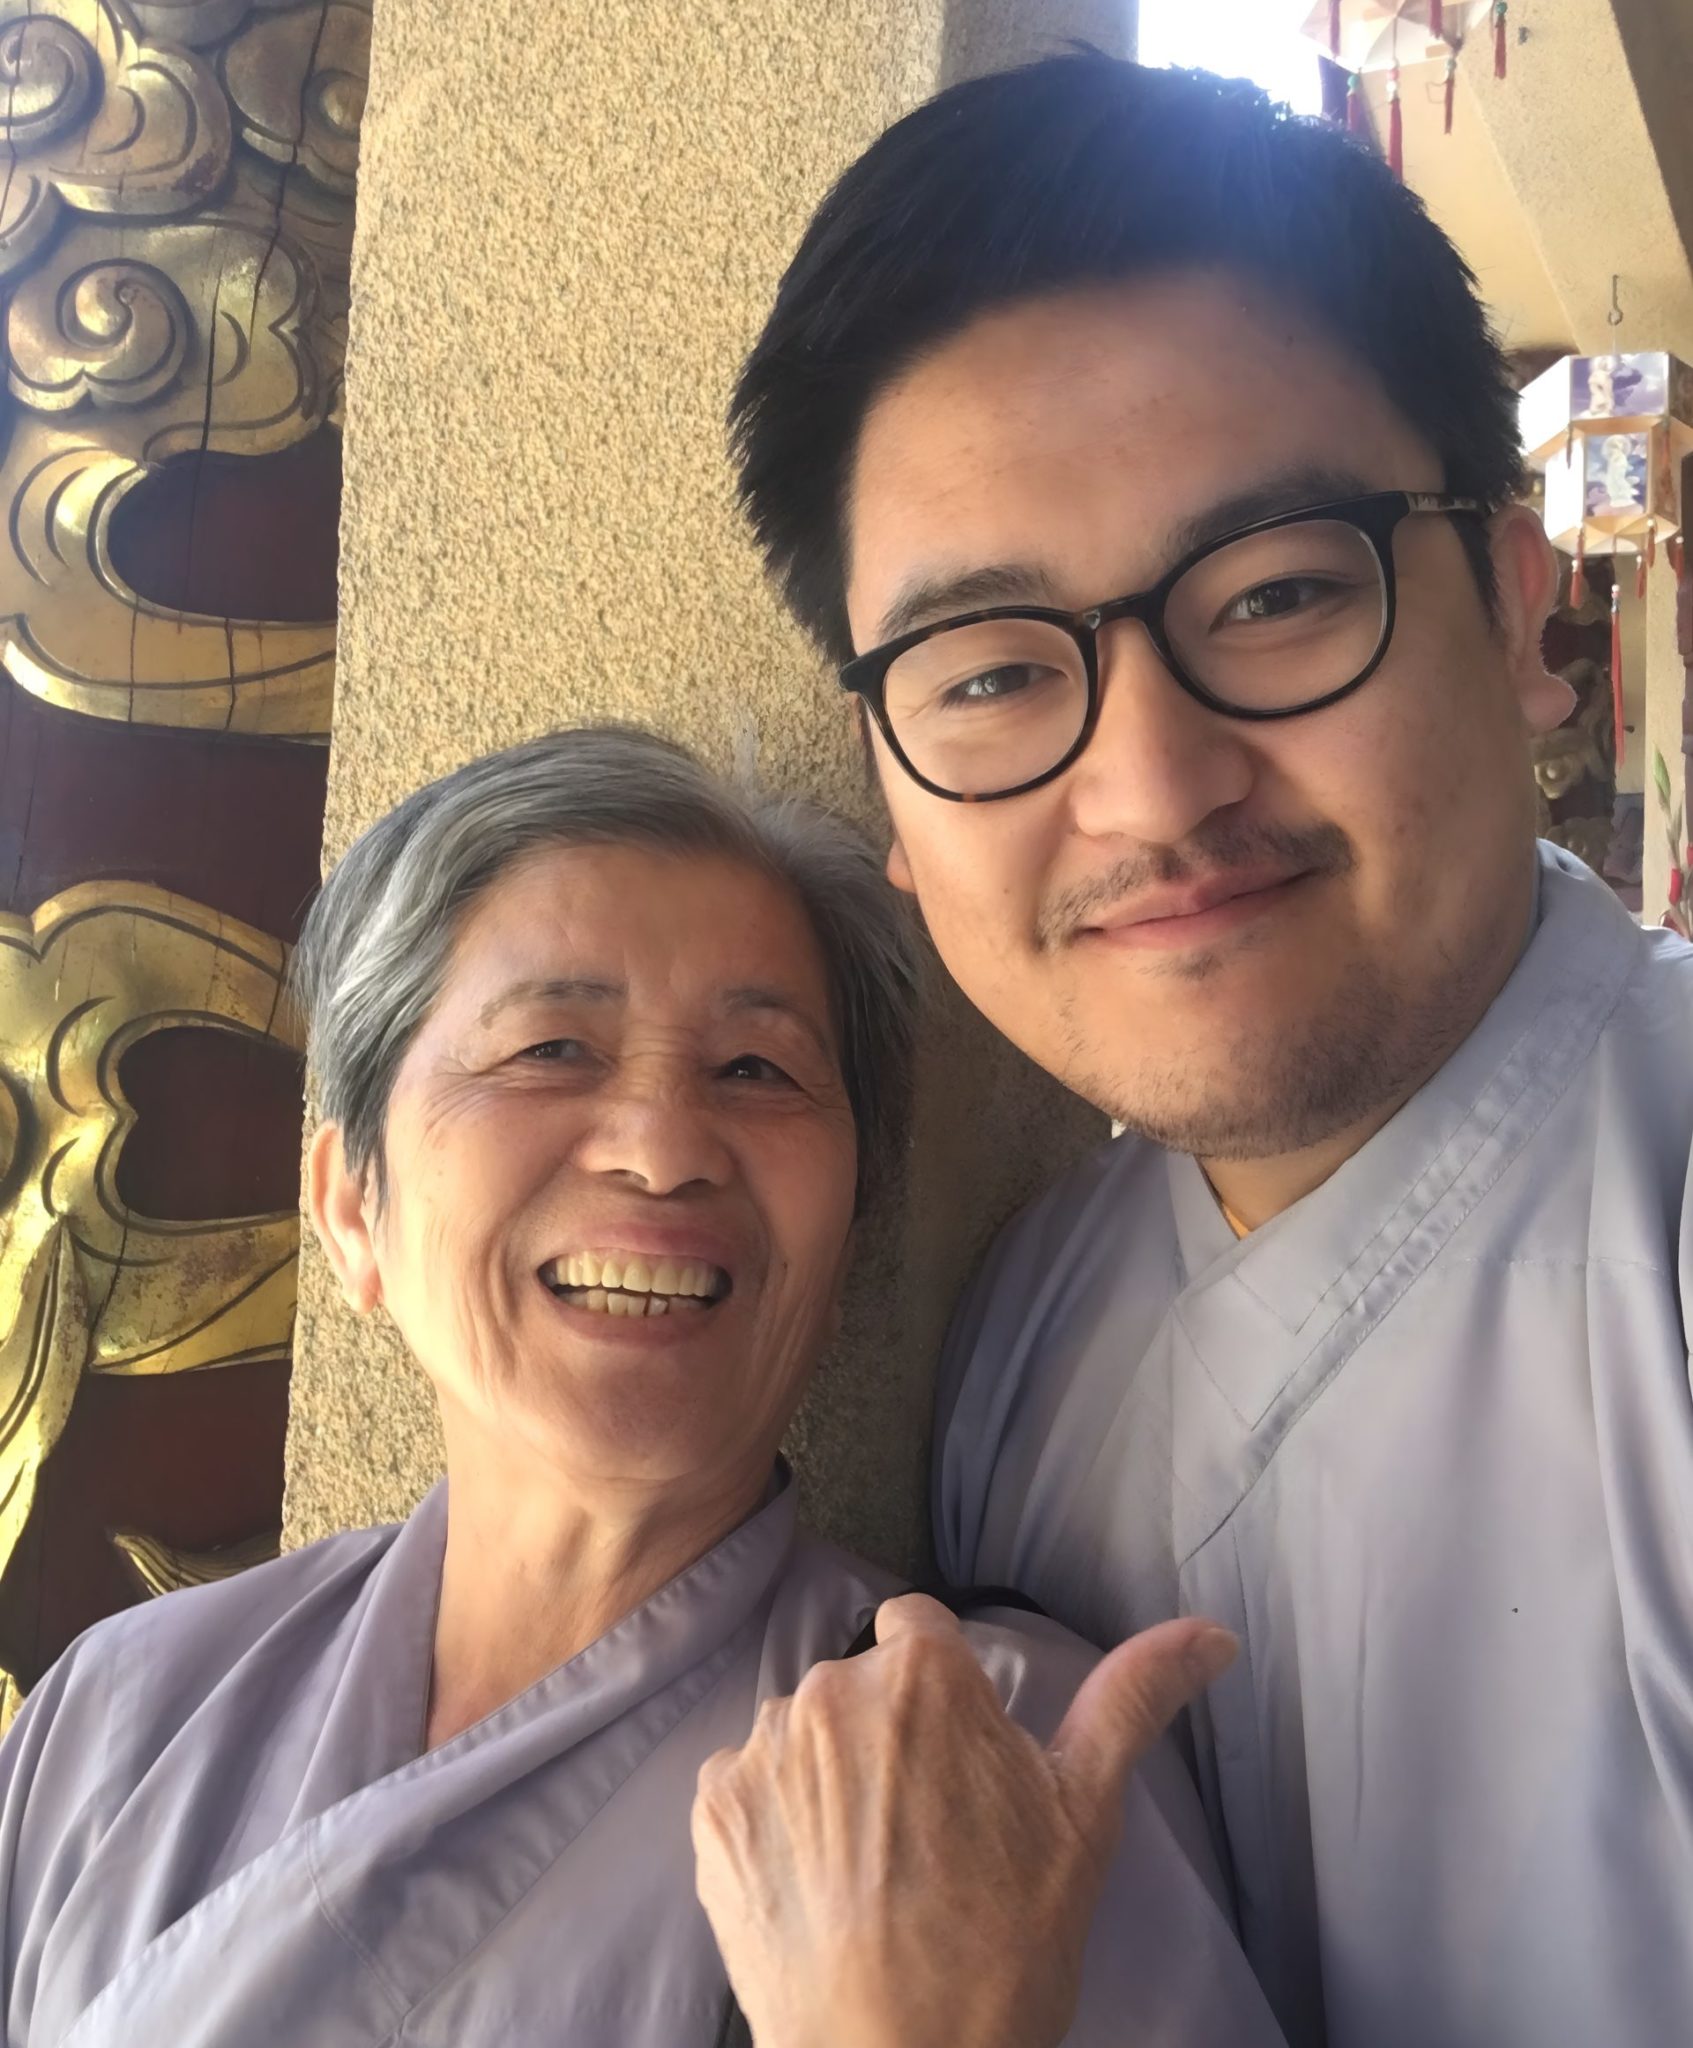 Klein Lieu ’13 honors his mother, Mai Huynh, through an endowment that bears her name: “This woman is my inspiration for everything.”